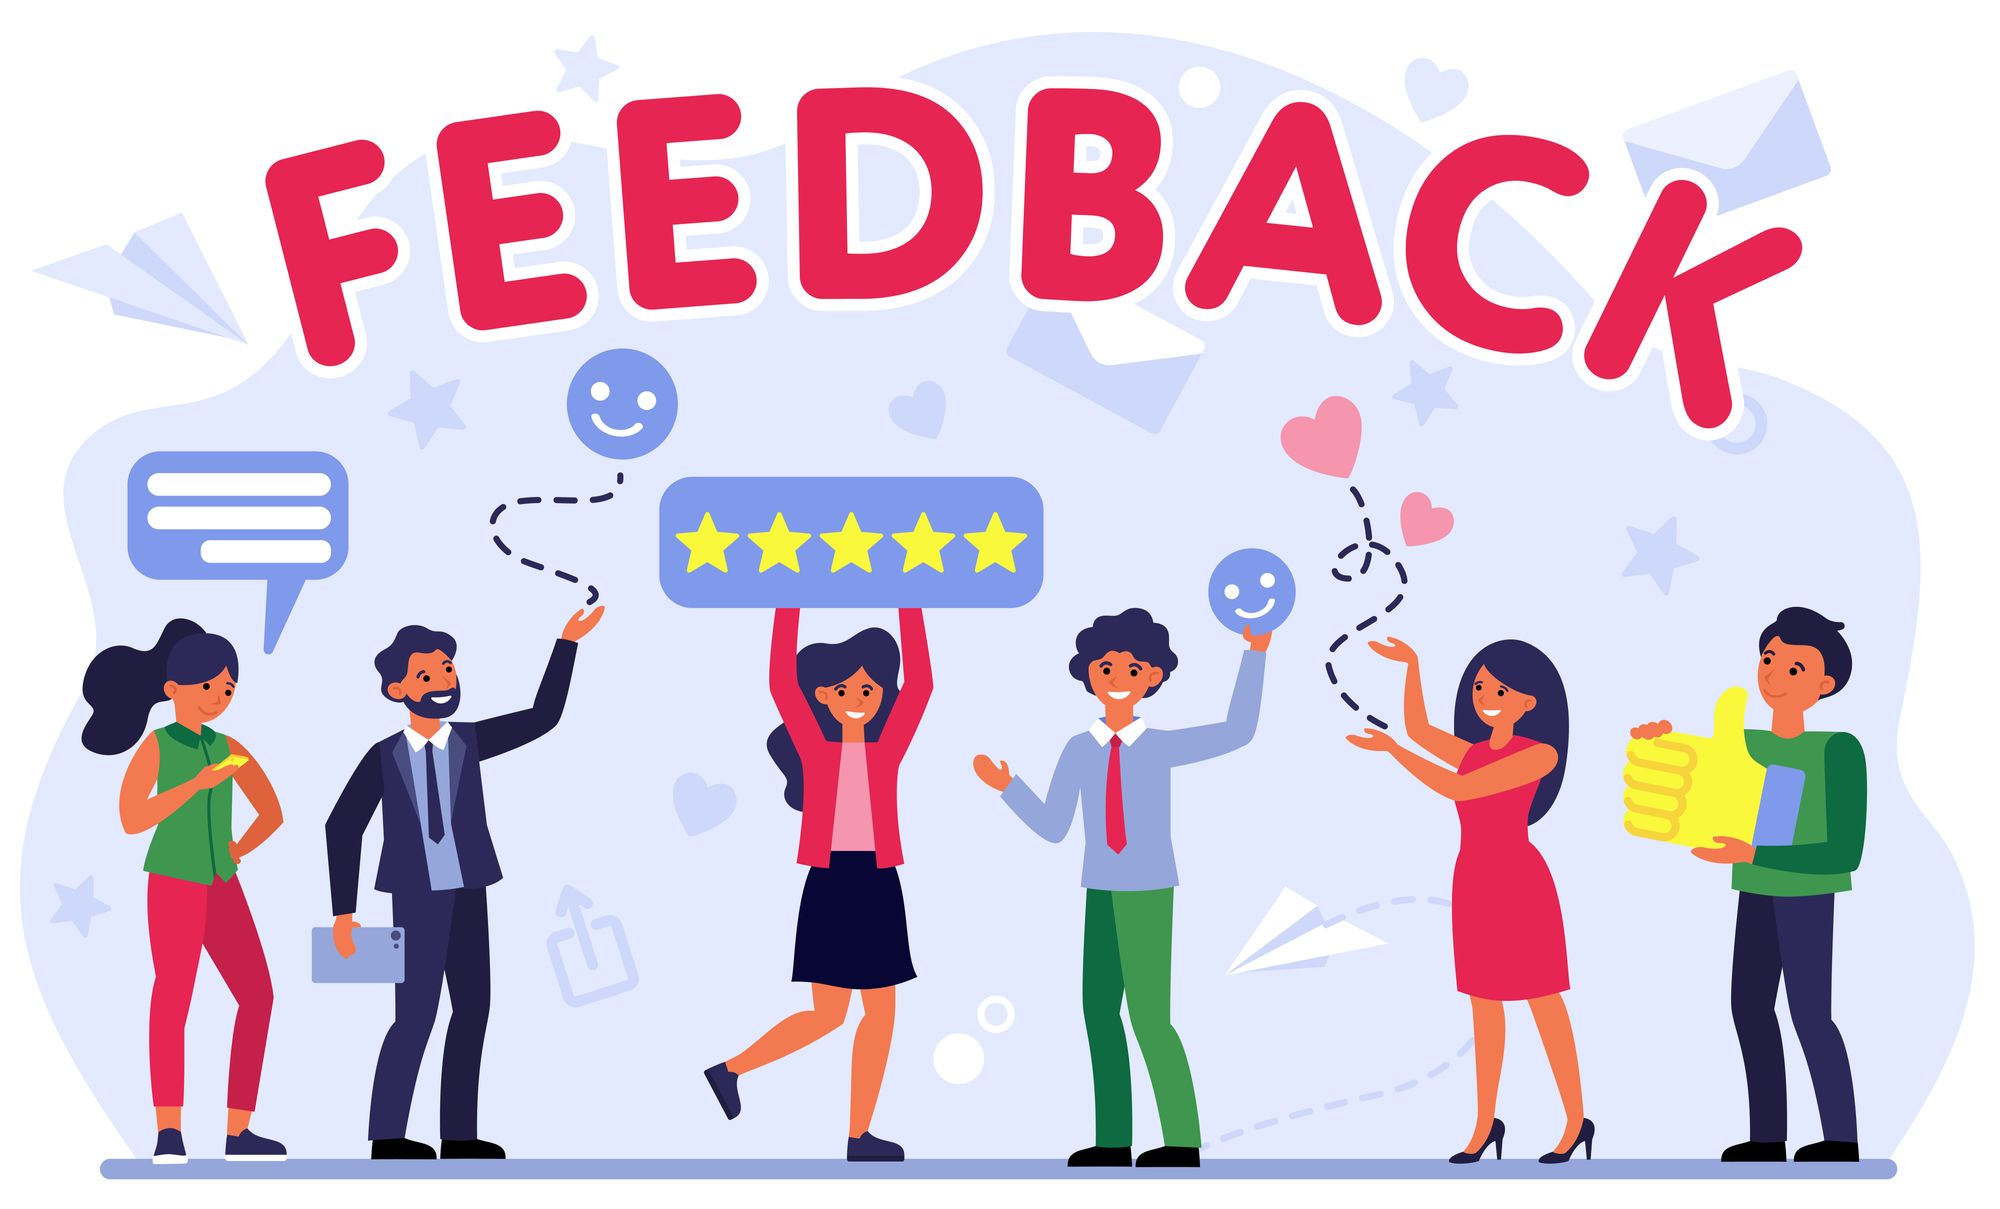 Customer Feedbacks are crucial to improve product and service